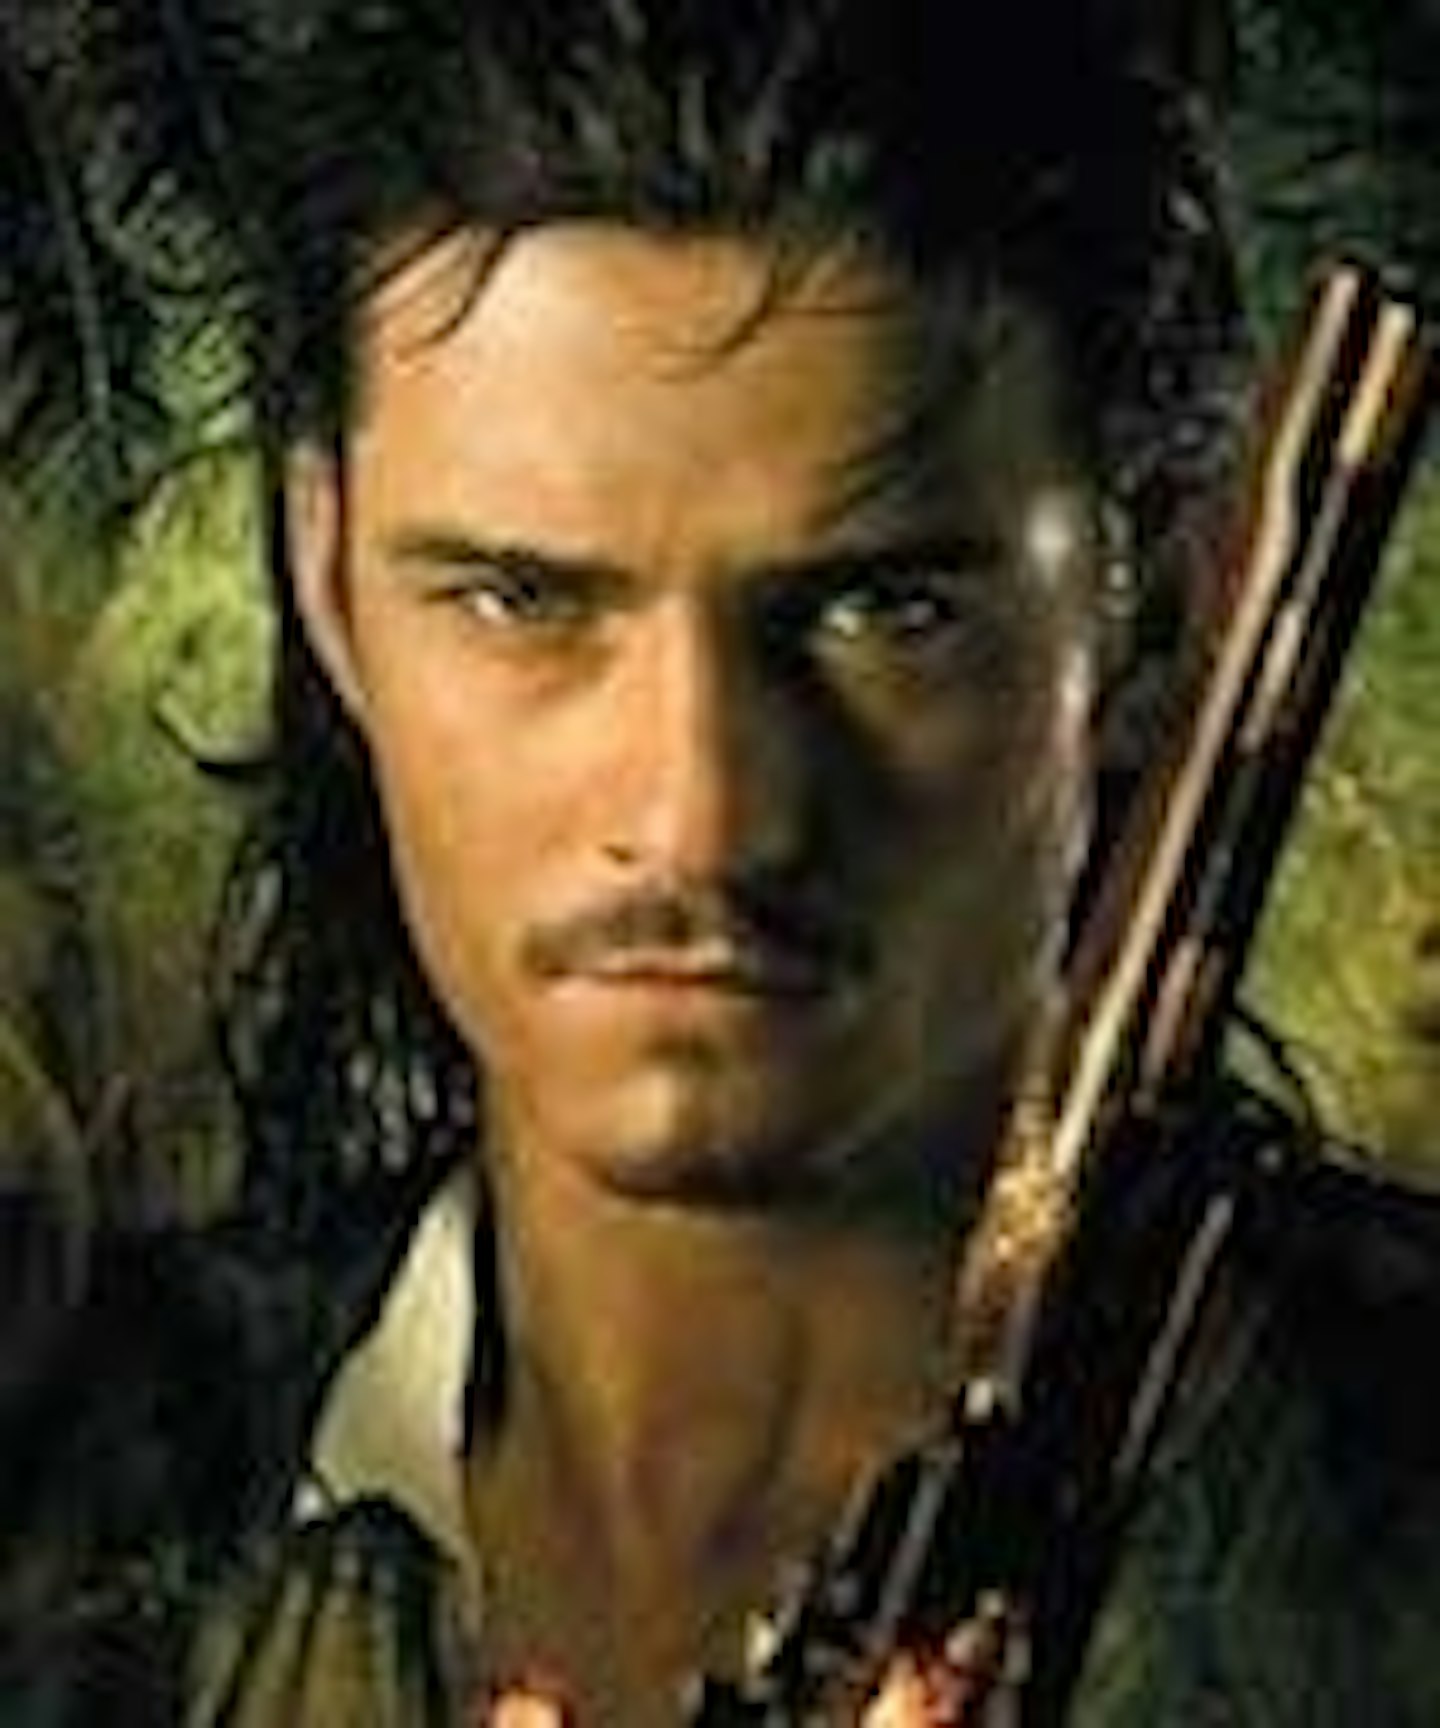 Orlando Bloom Returning To Pirates Of The Caribbean?